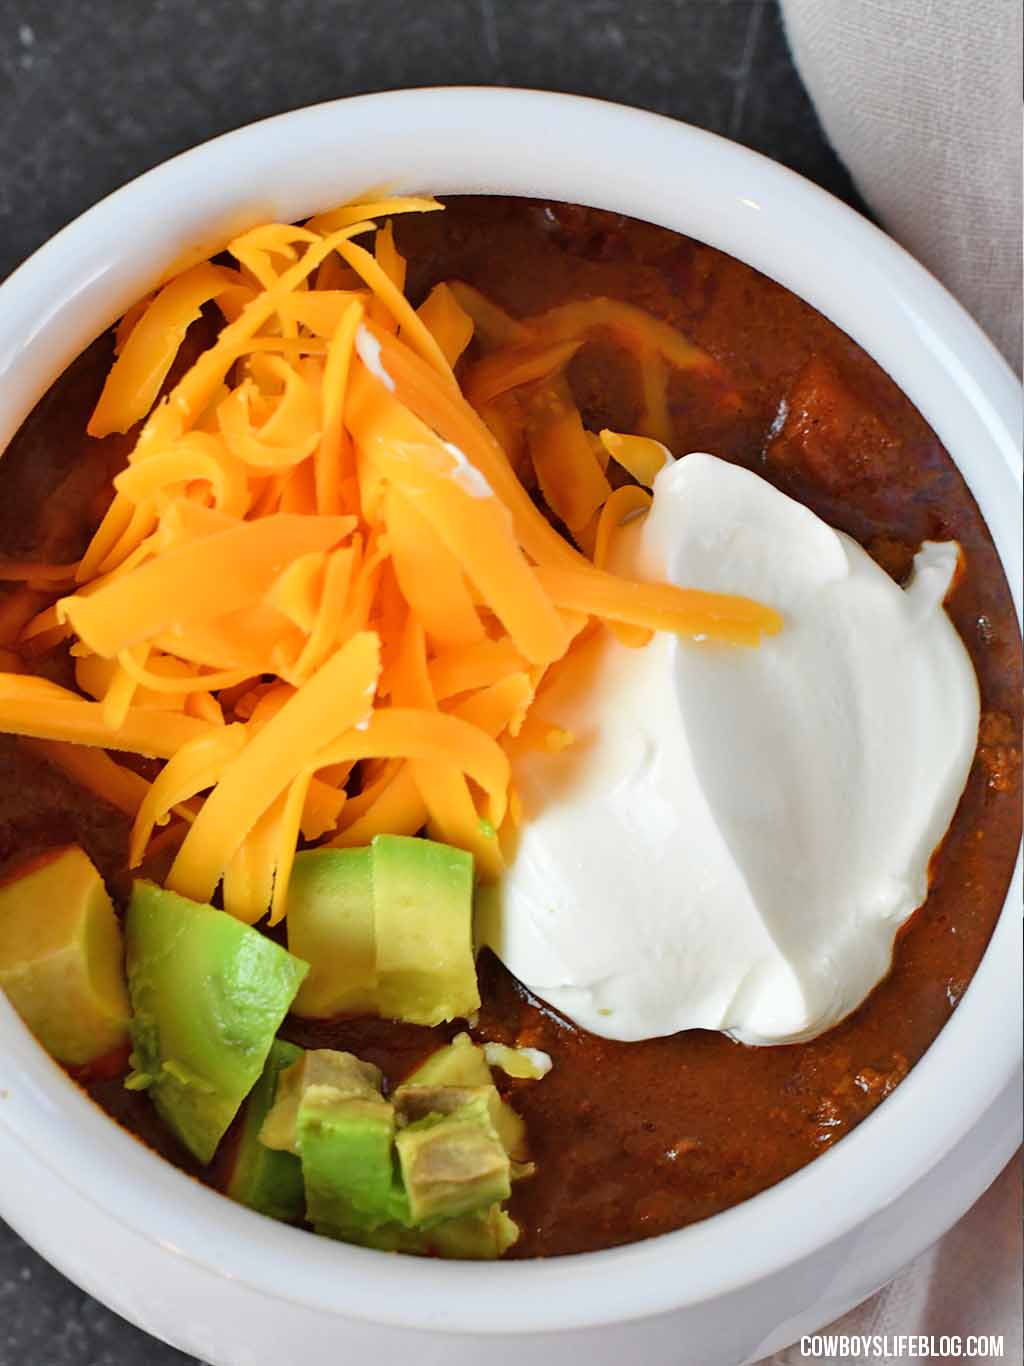 How to make the best chili recipe